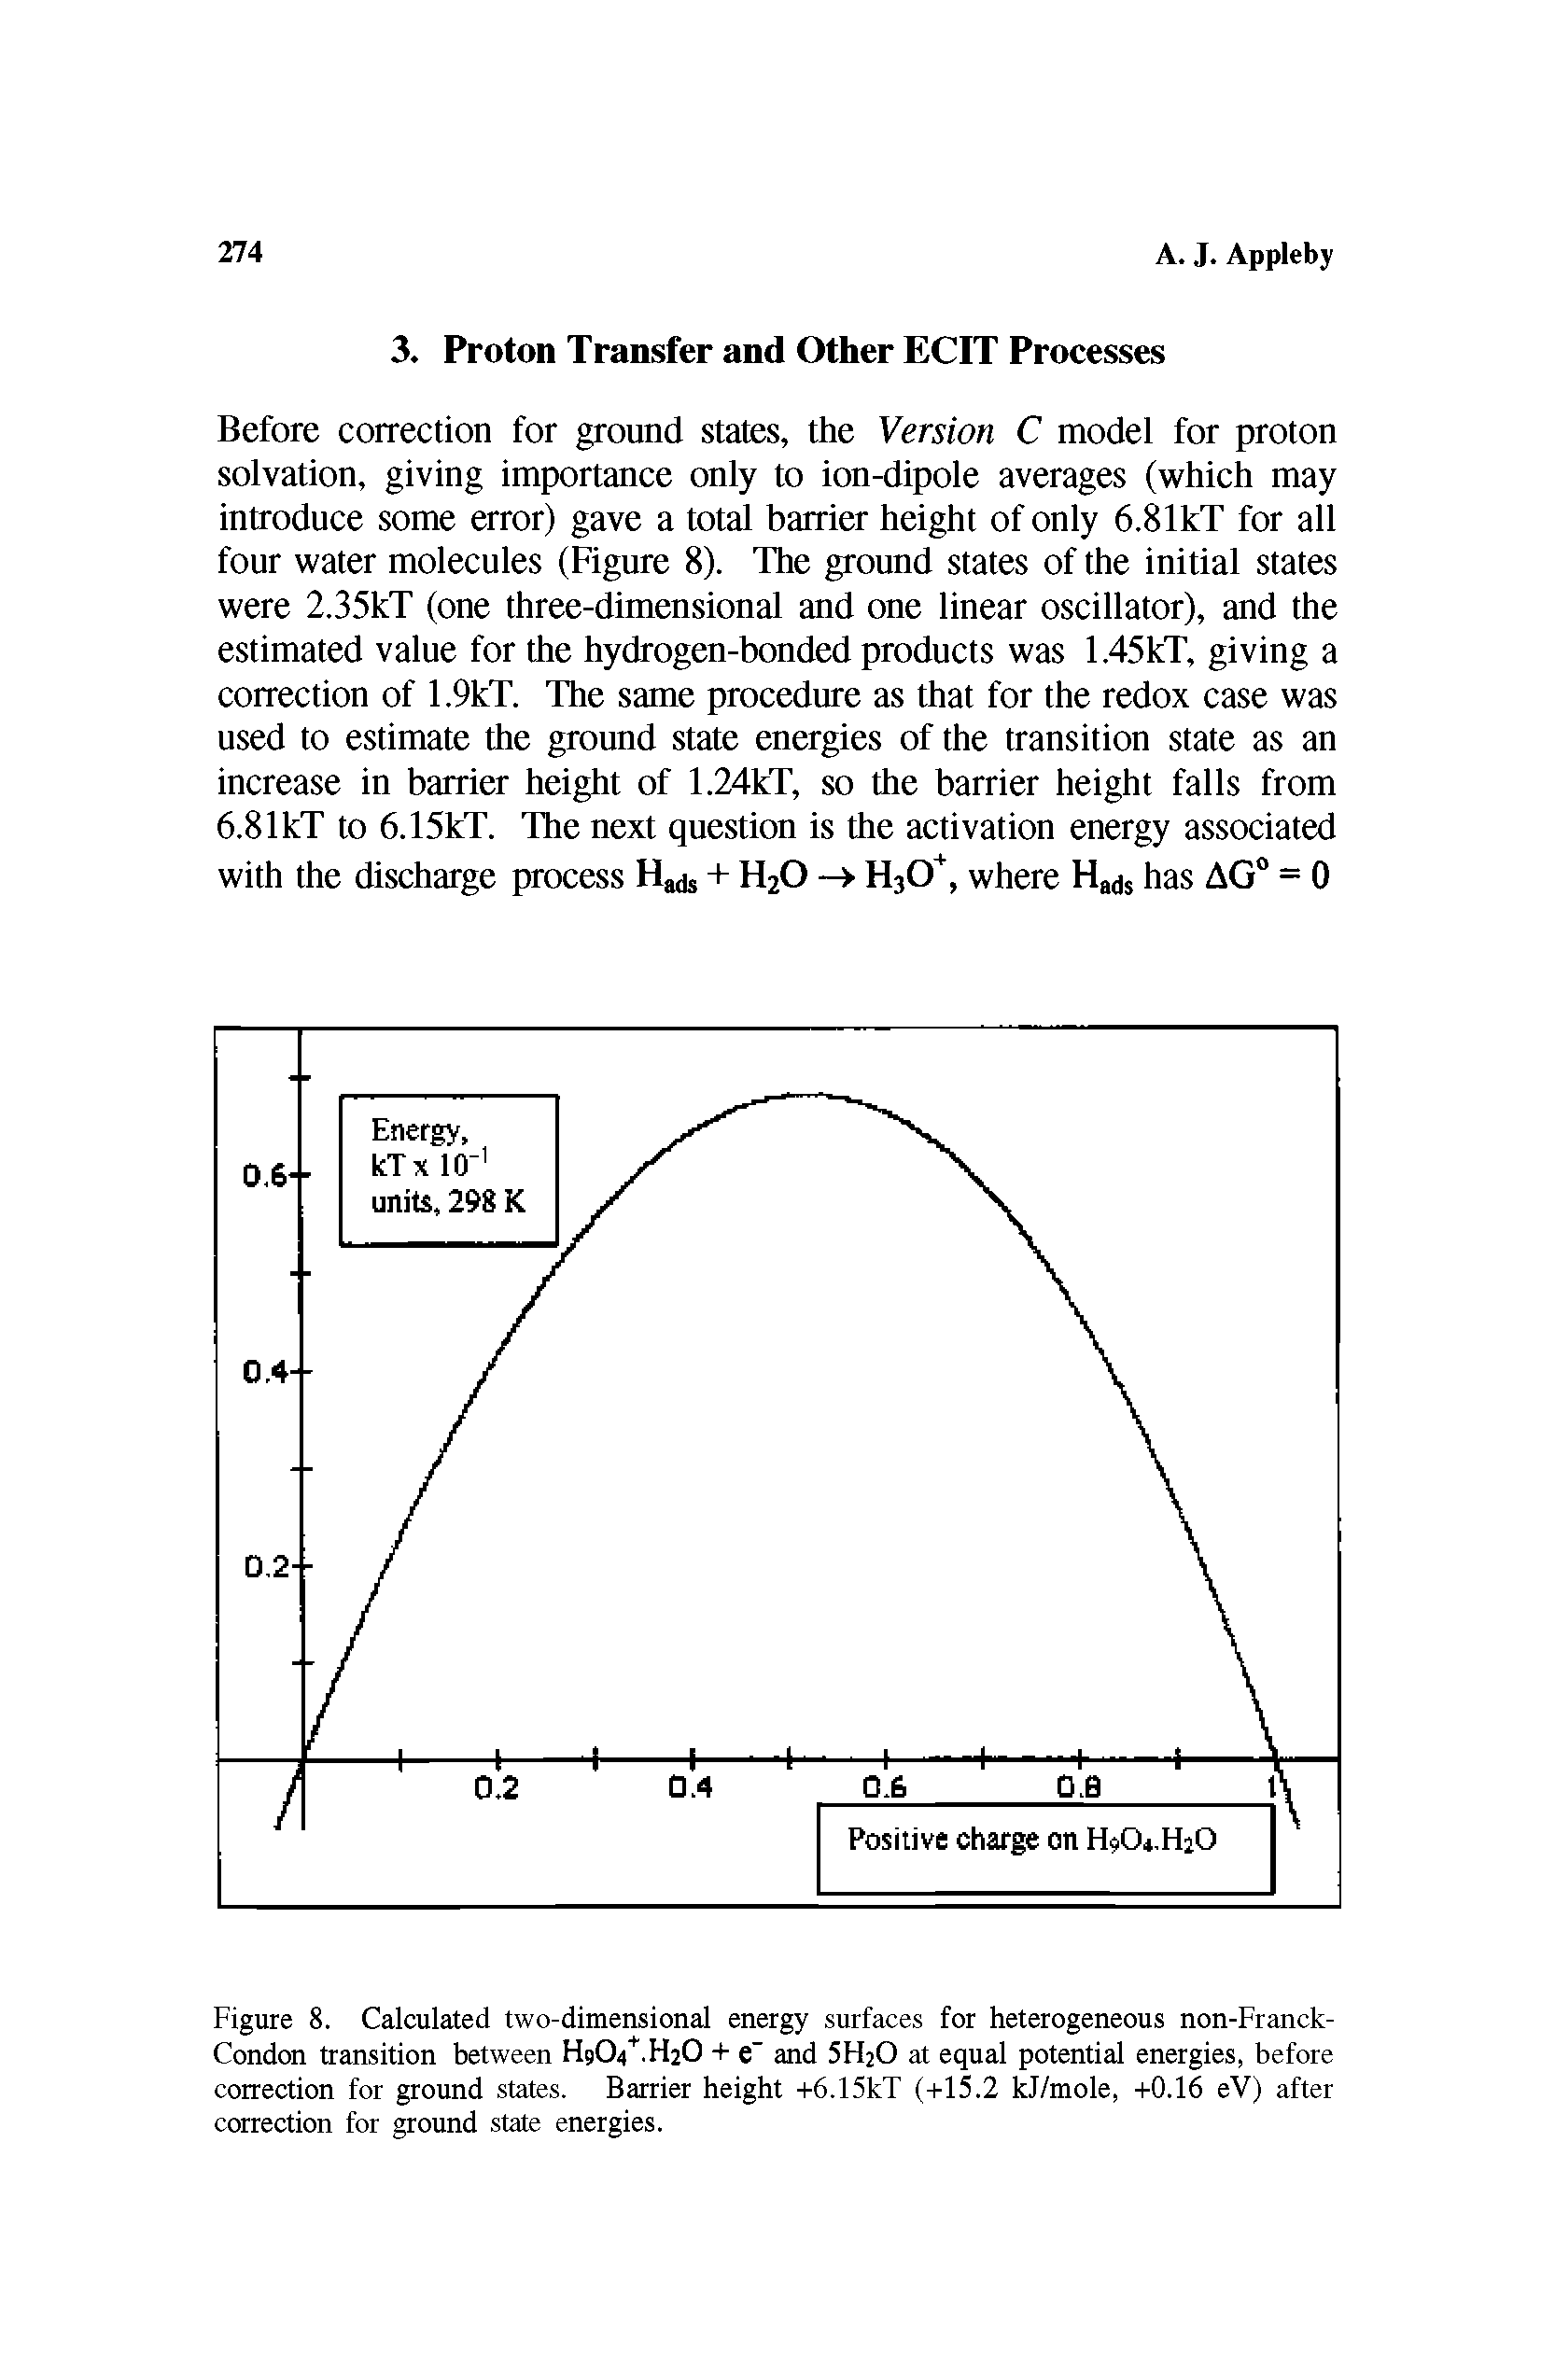 Figure 8. Calculated two-dimensional energy surfaces for heterogeneous non-Franck-Condon transition between H9OT.H2O + e and 5H2O at equal potential energies, before correction for ground states. Barrier height +6.15kT (+15.2 kJ/mole, +0.16 eV) after correction for ground state energies.